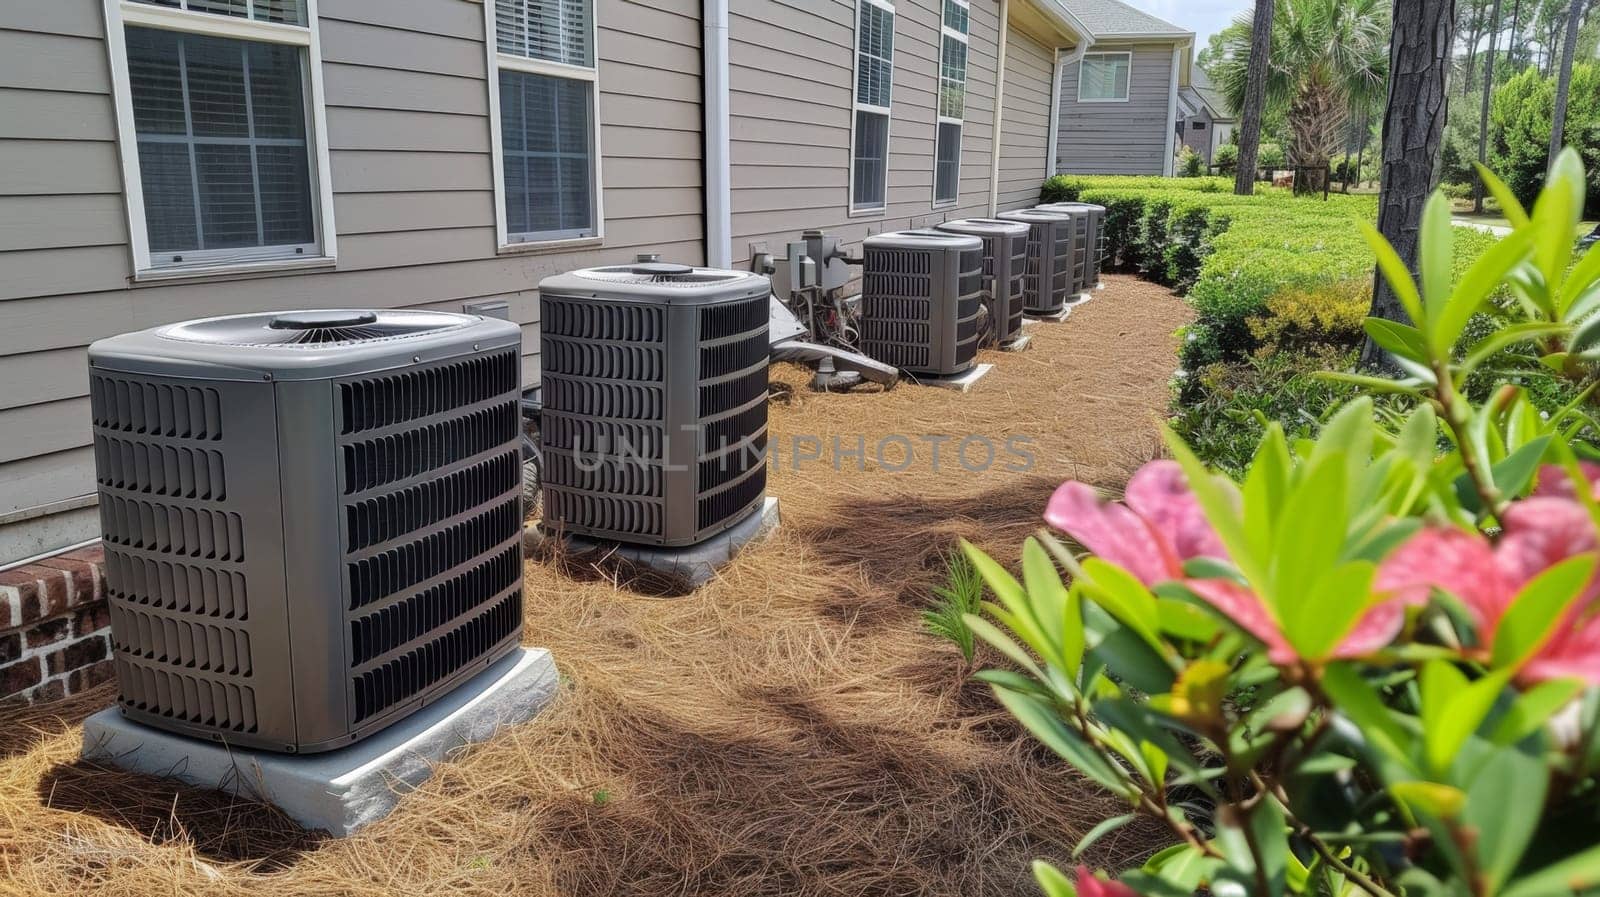 A row of air conditioners outside a house with flowers